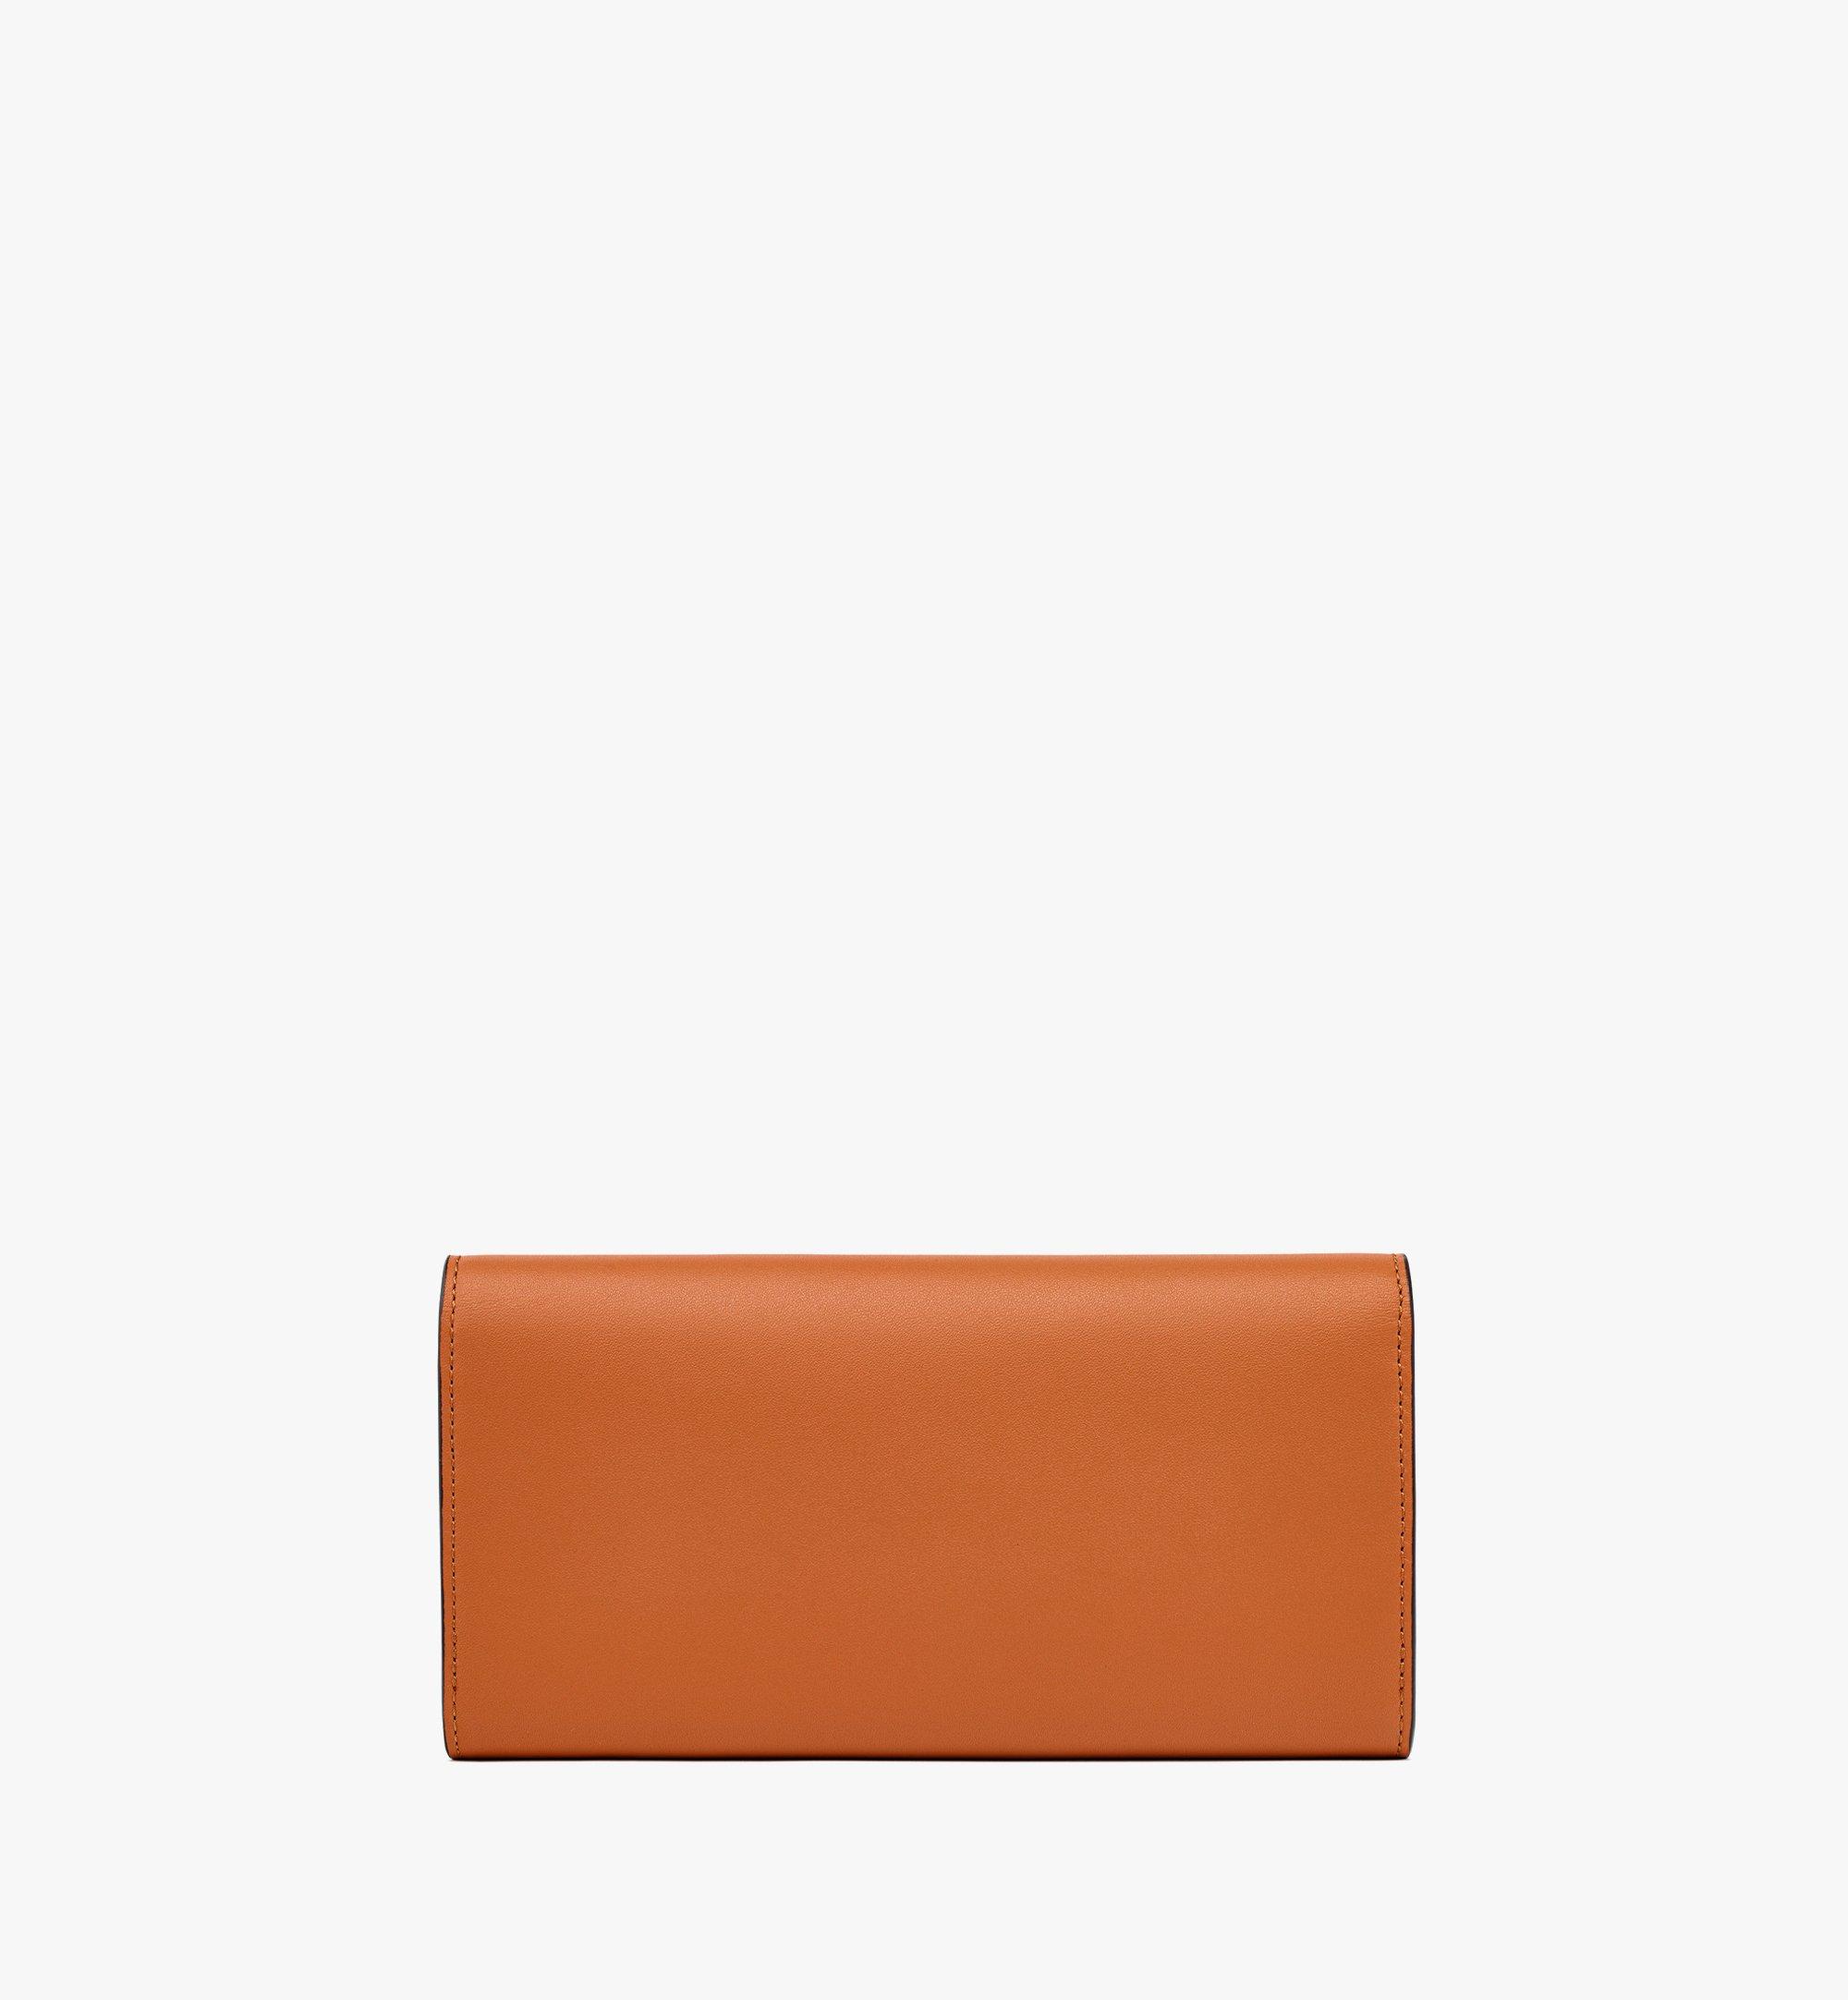 MCM Mode Travia Continental Wallet in Spanish Leather Cognac MYLDSLD01CO001 Alternate View 2